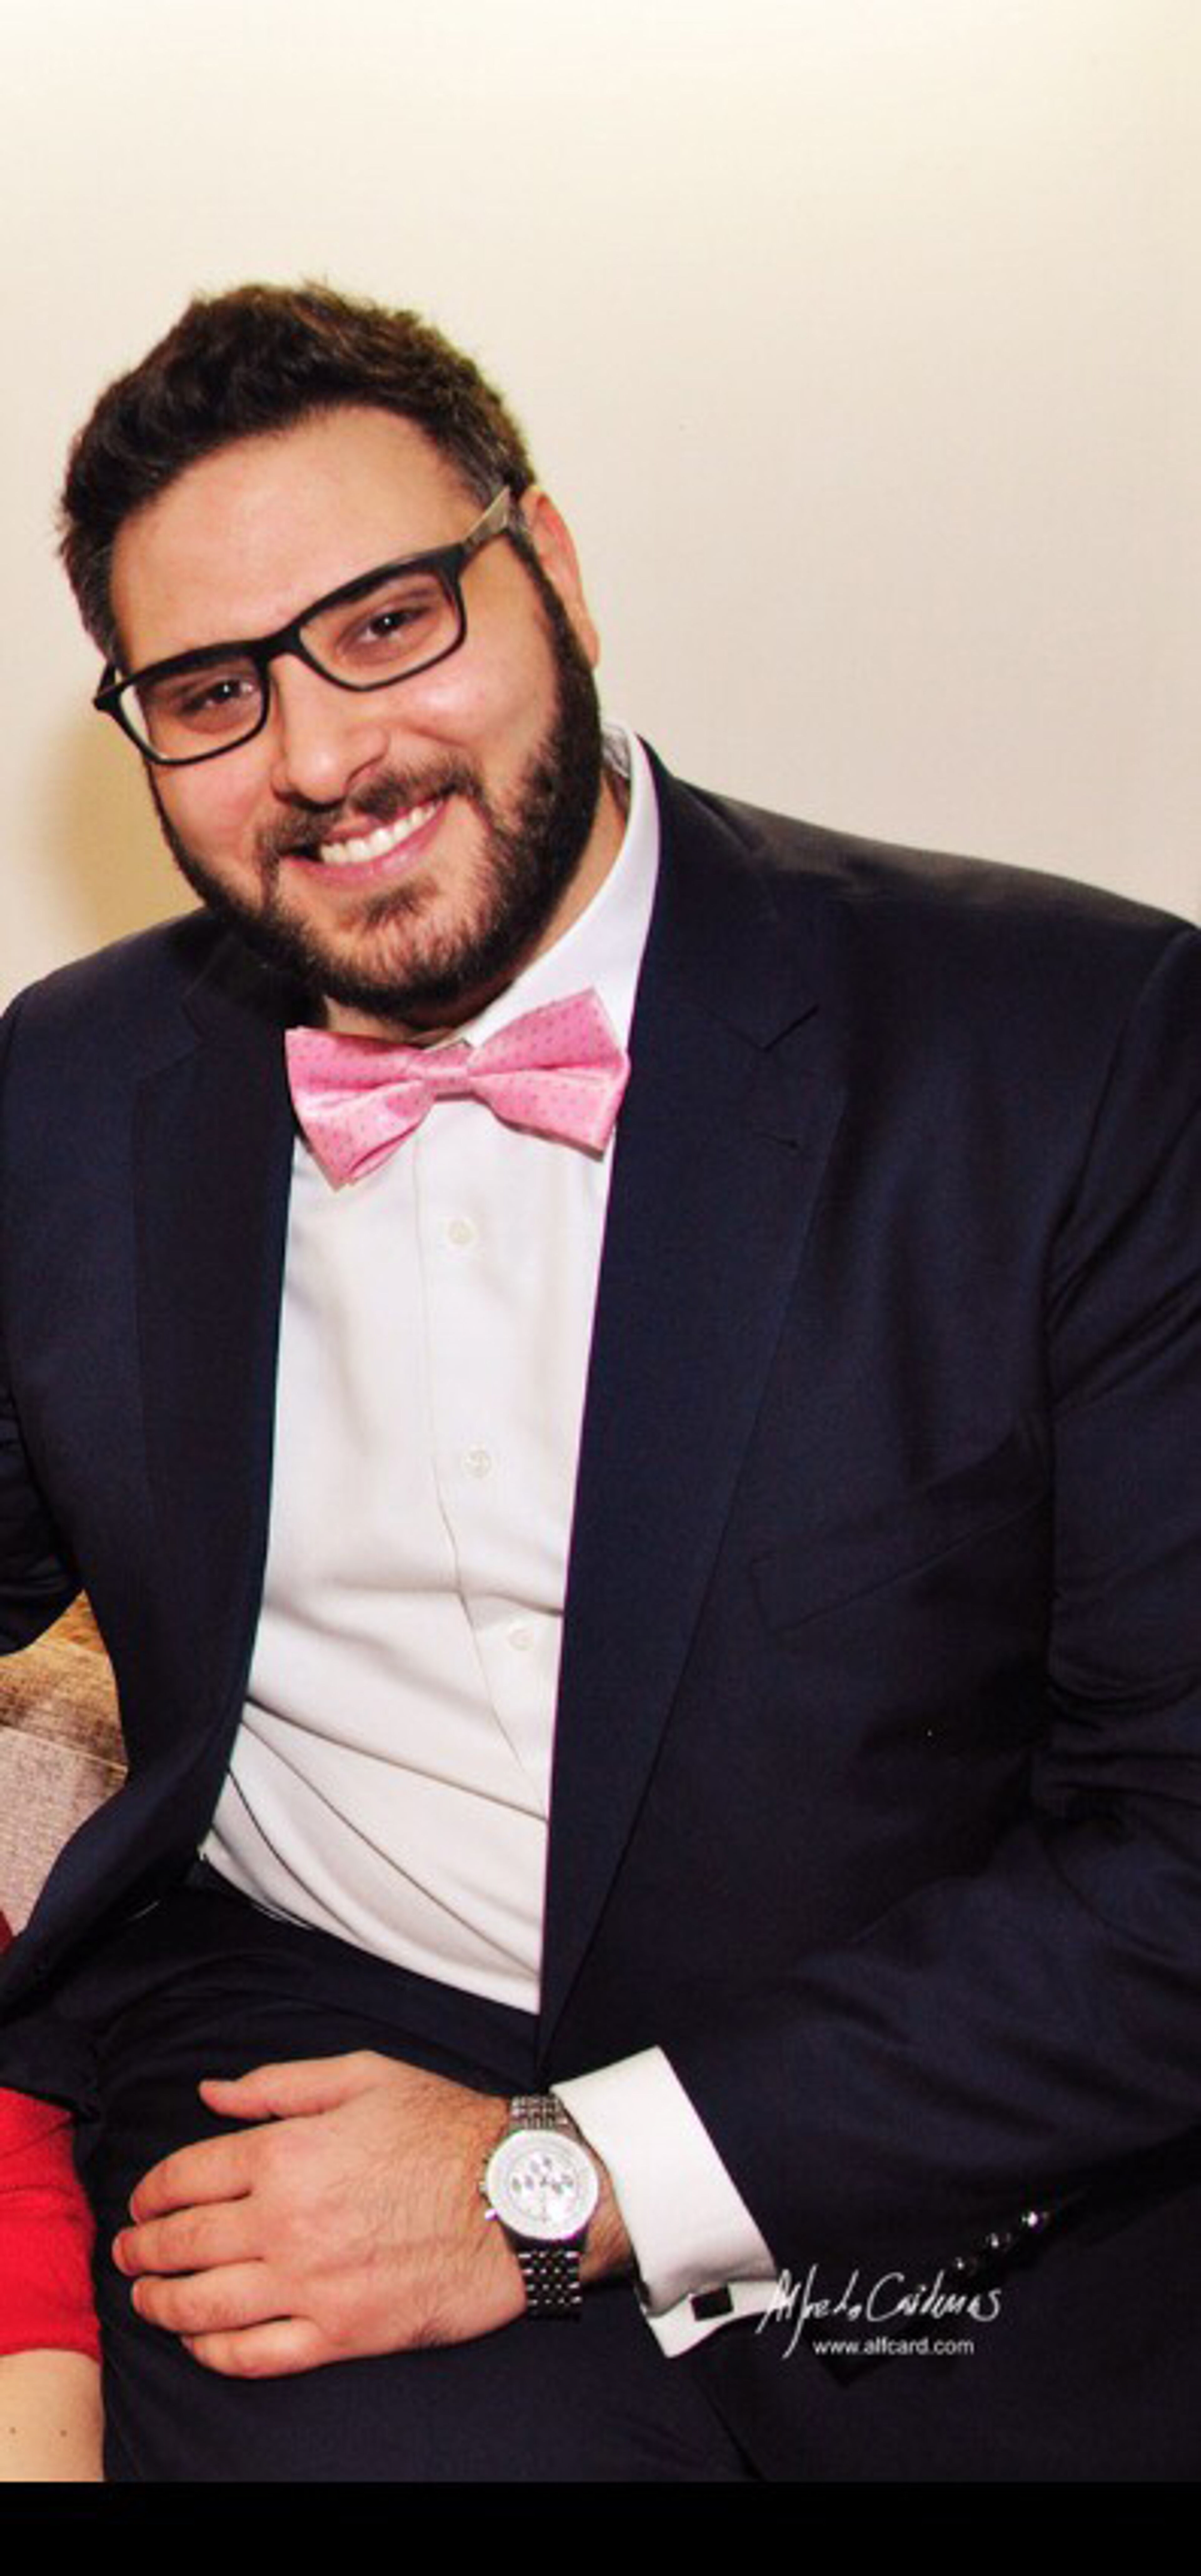 A cheerful man with glasses, wearing a black suit, white shirt, and a pink bow tie, sits with a watch on his wrist.